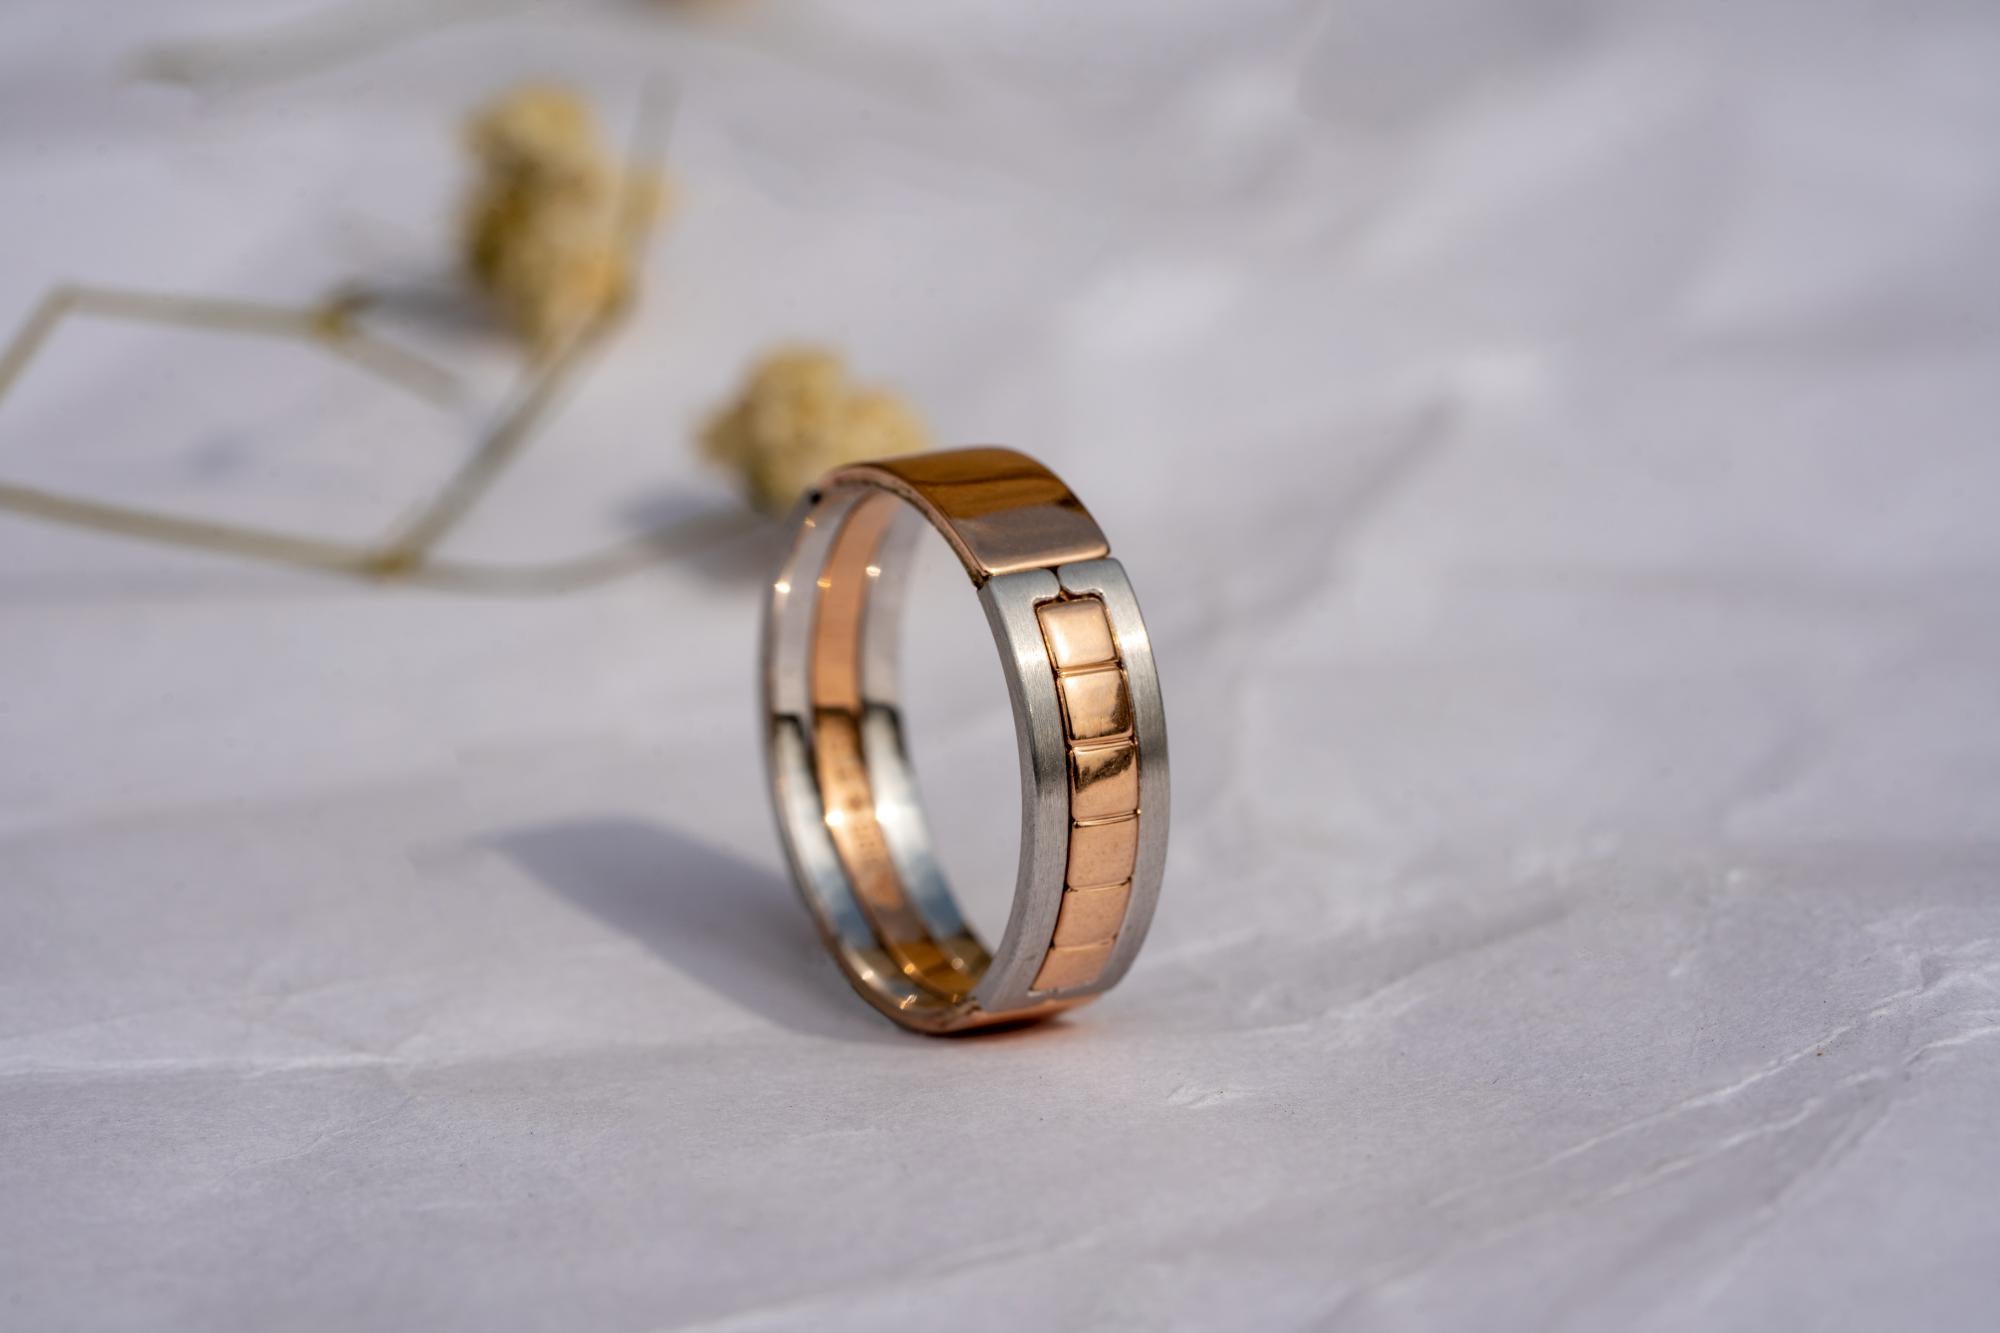 Men's wedding band made of solid 14k gold